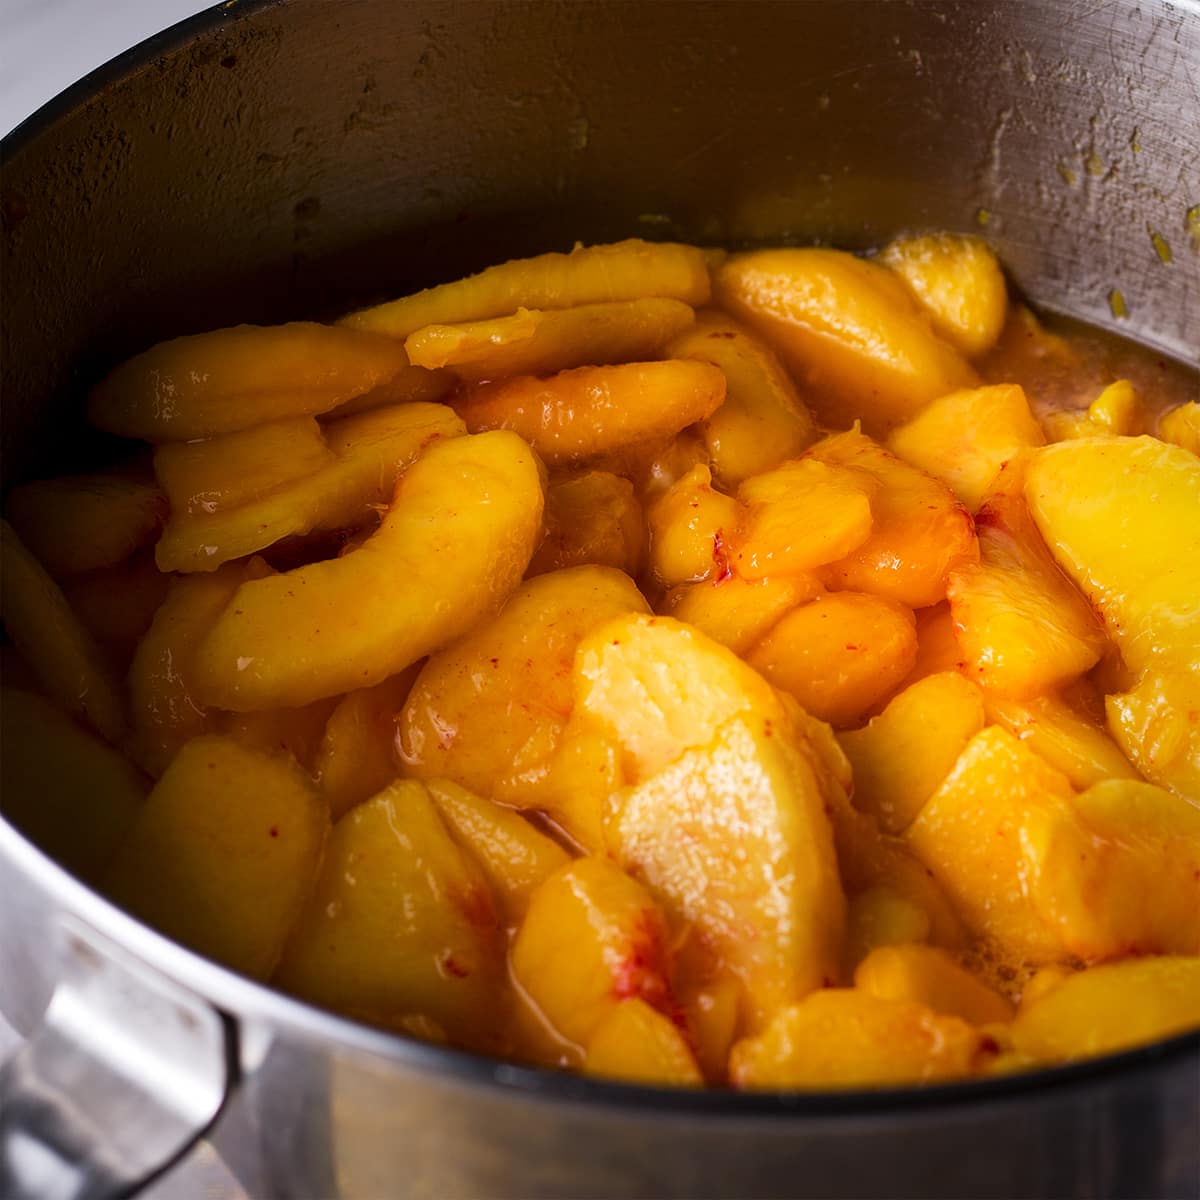 A large saucepan filled with sliced, fresh peaches.